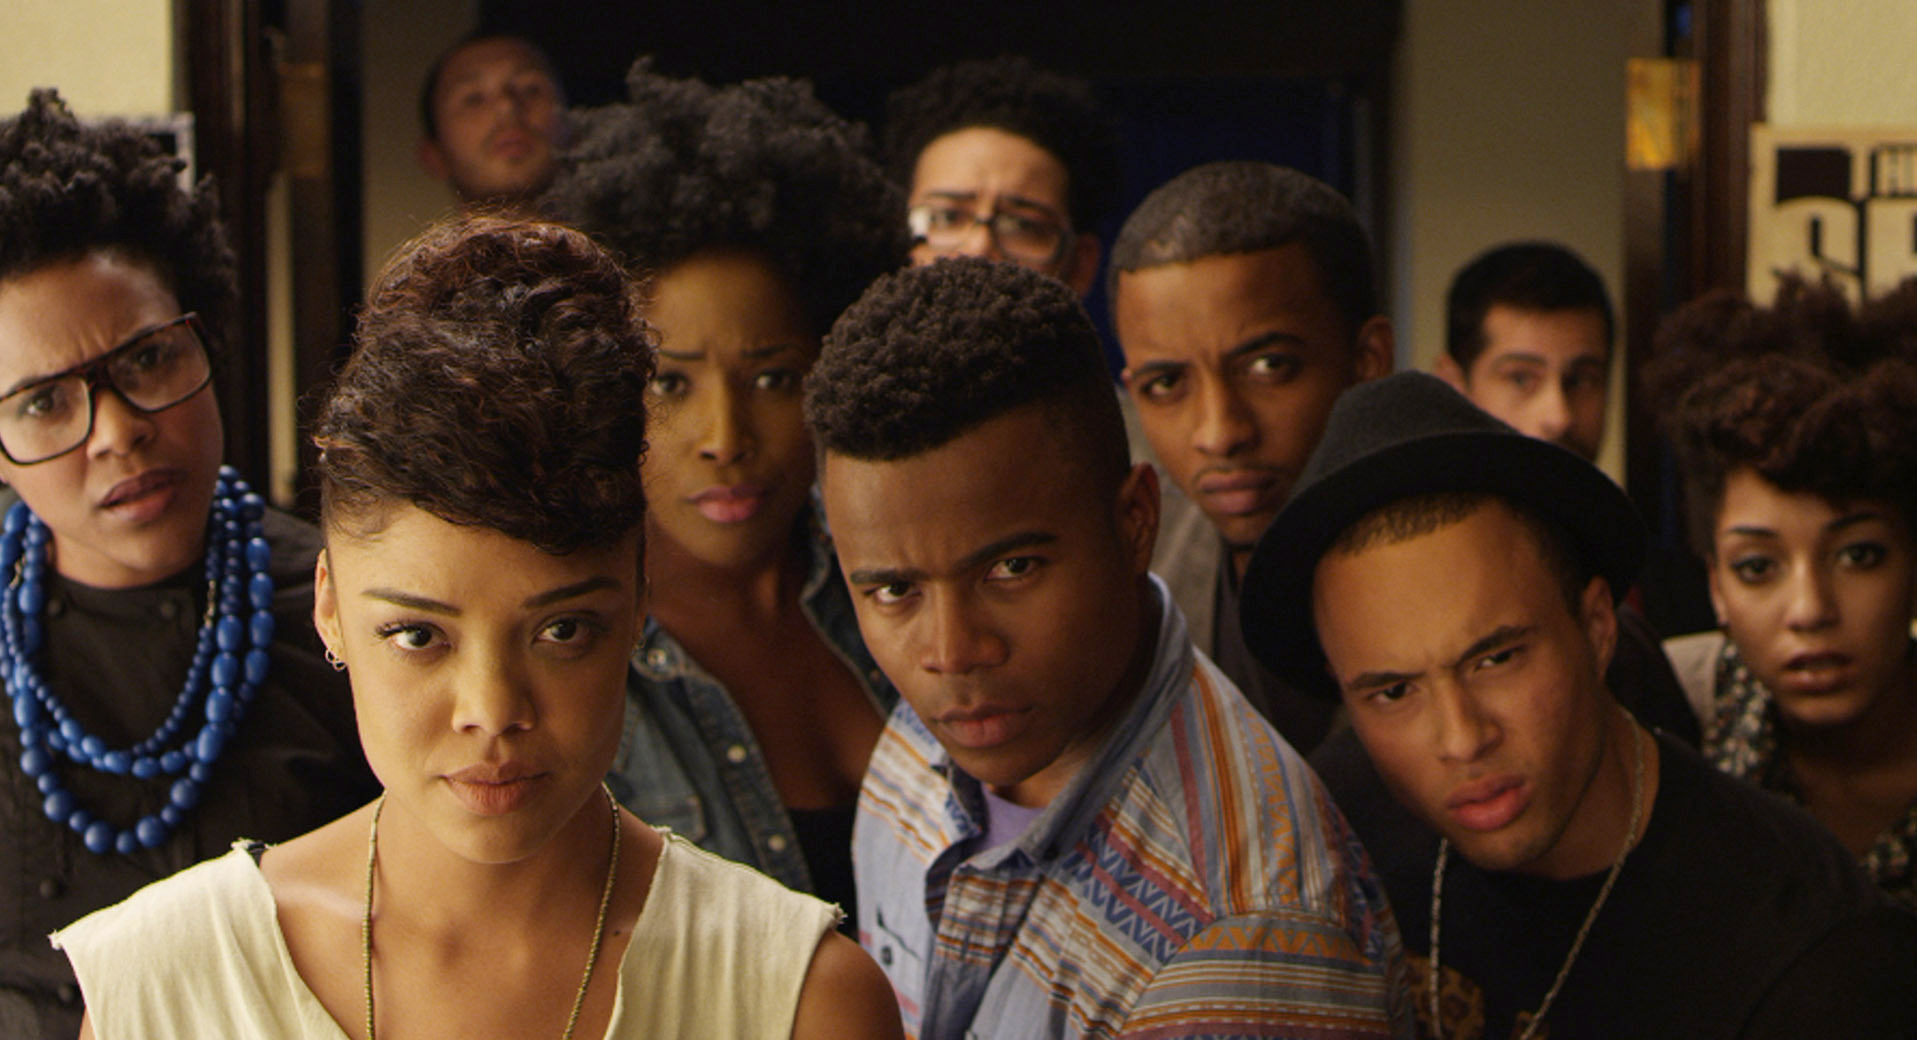 DEAR WHITE PEOPLE, front, from left: Tessa Thompson, Tyler James Williams, Brandon P Bell, 2014. ©Roadside Attractions/courtesy Everett Collection